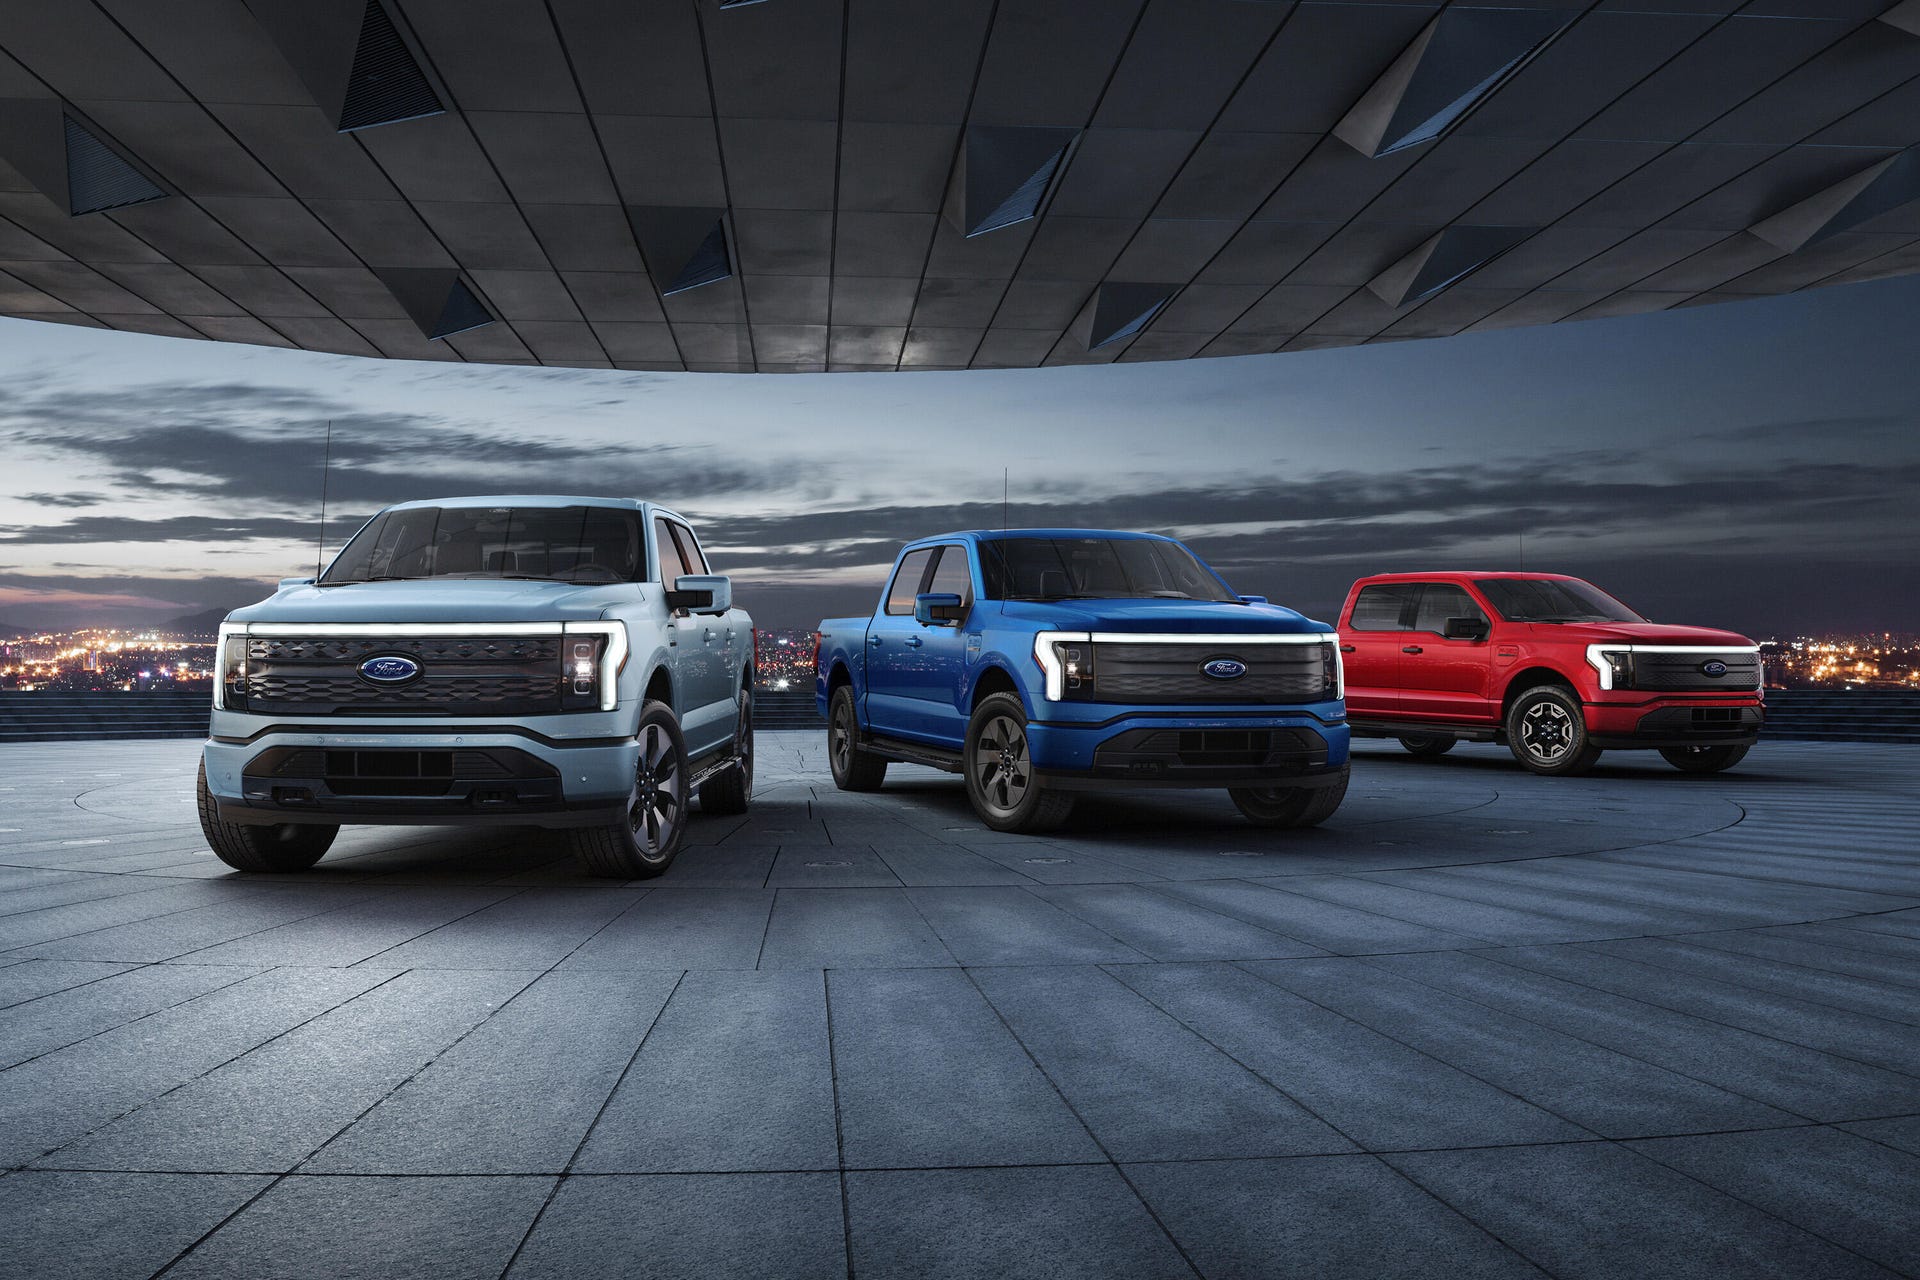 2022 Ford F-150 Lightning - red, blue and silver